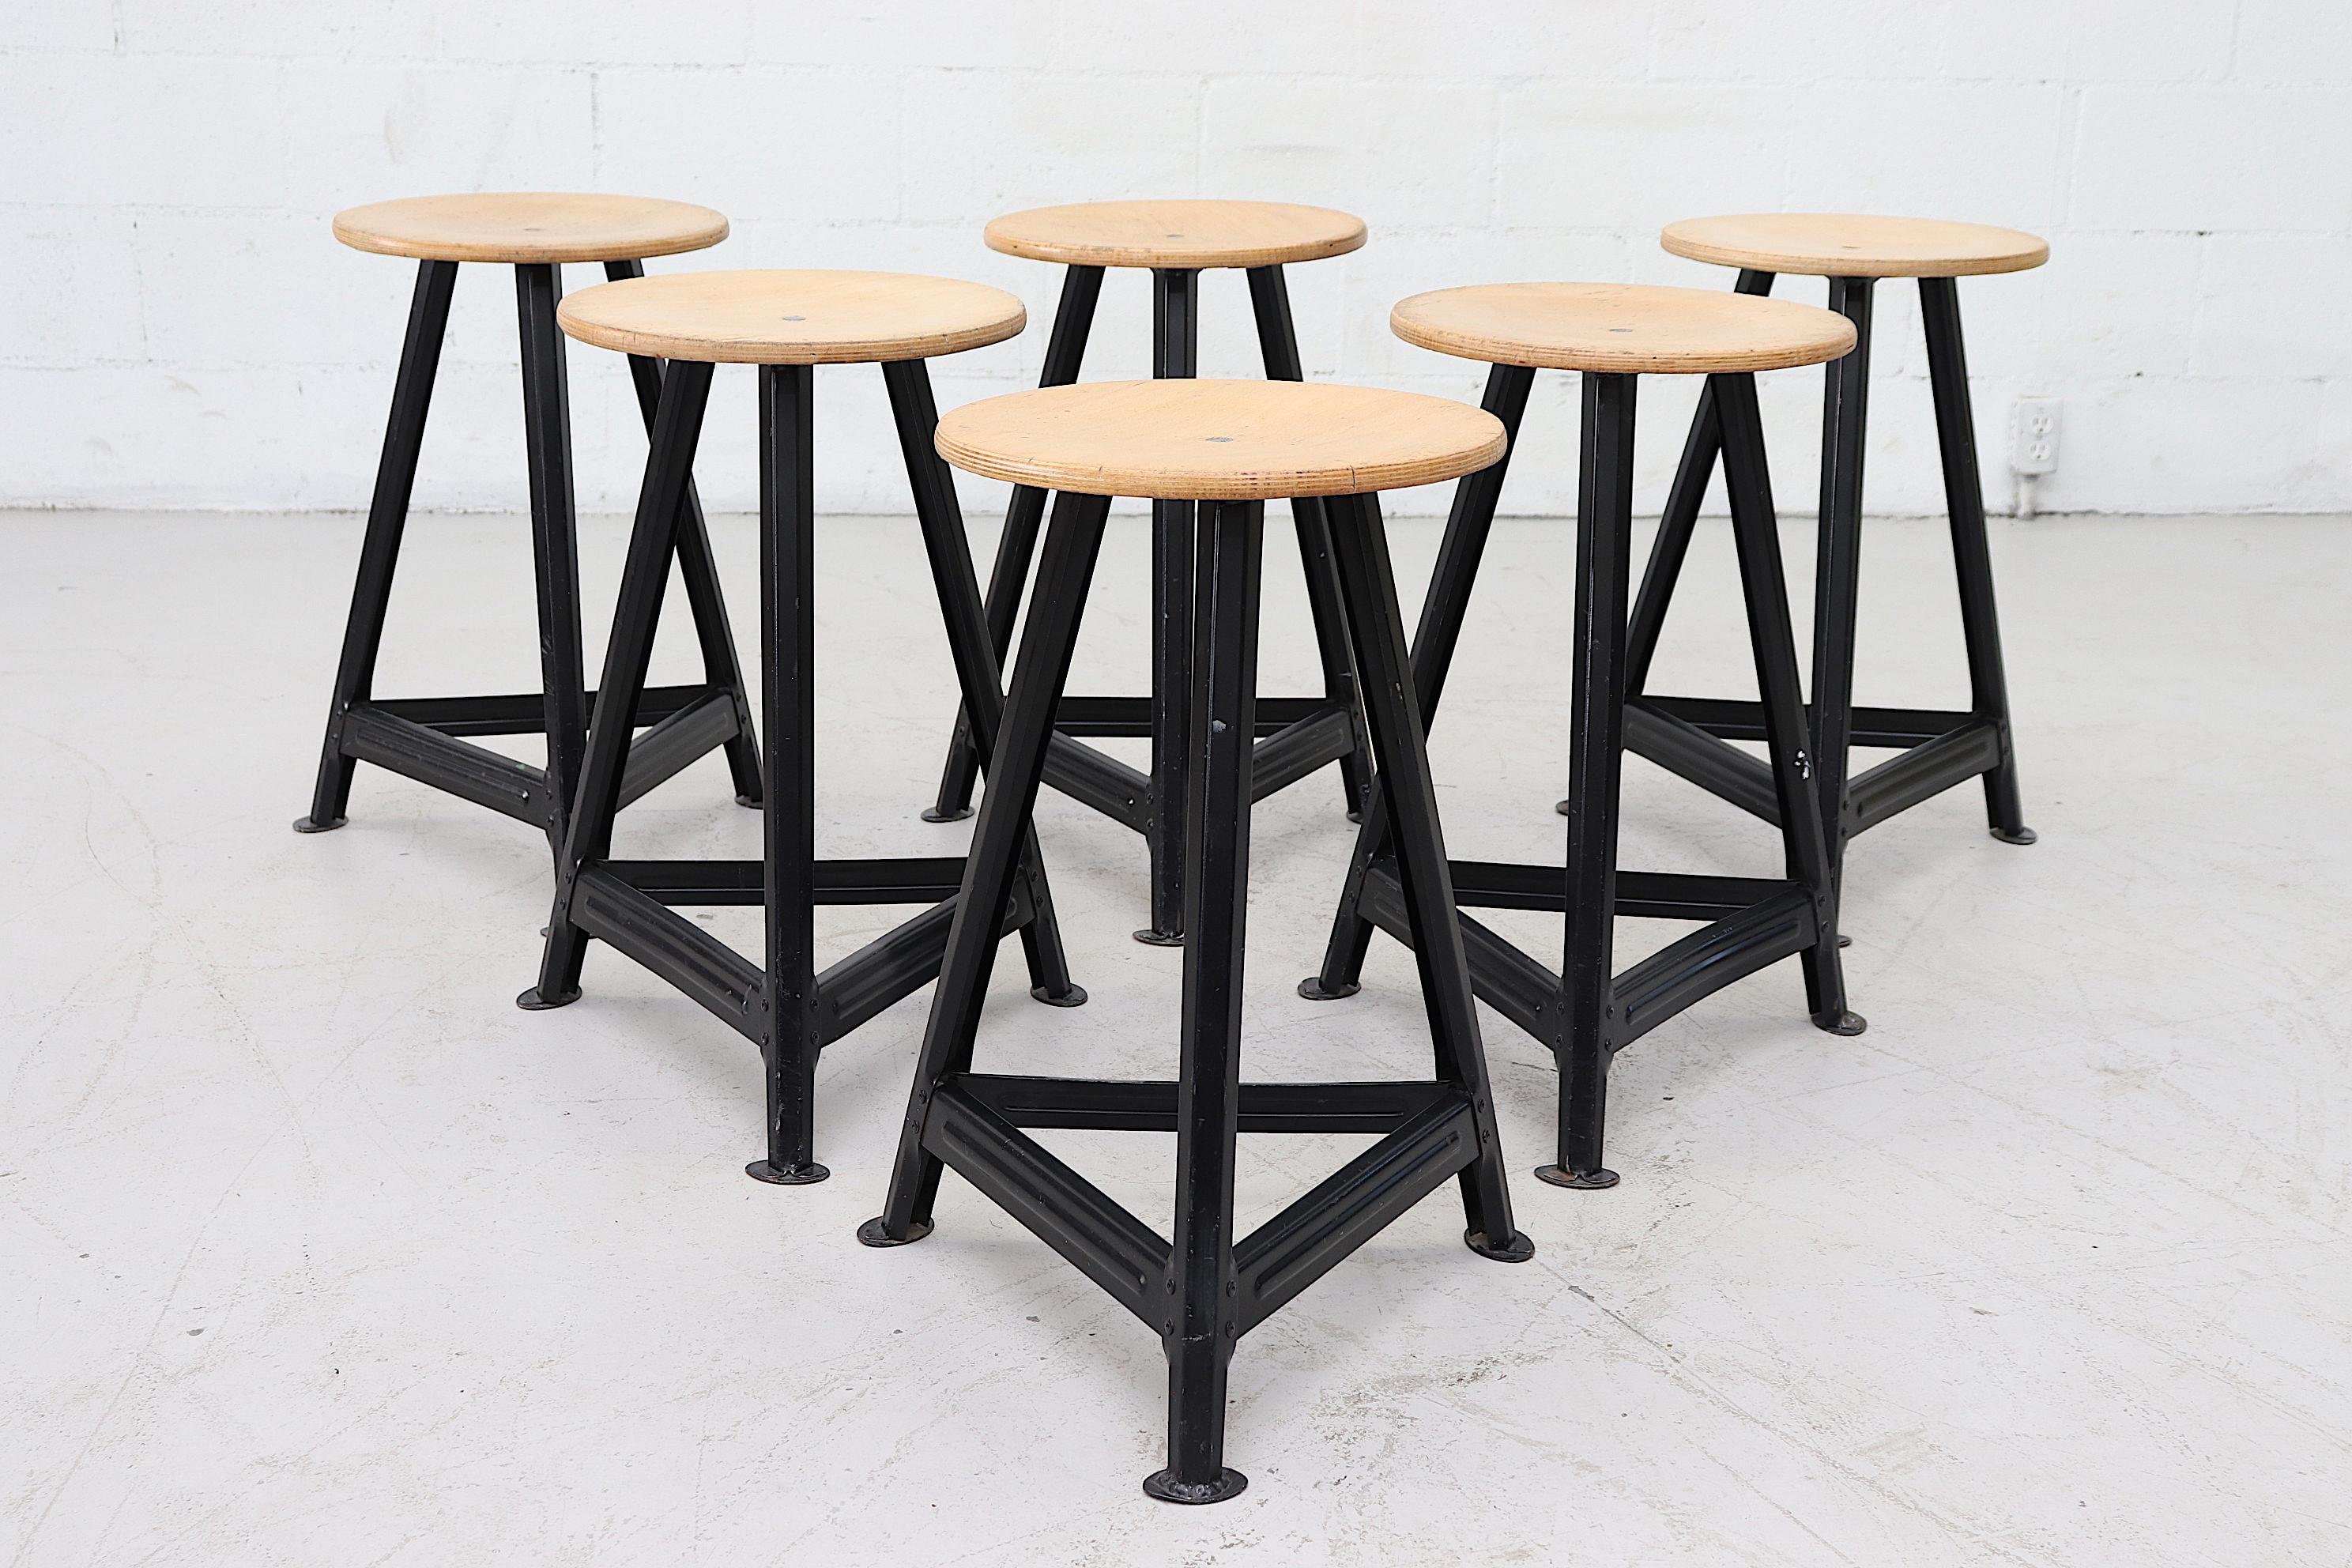 Industrial task stools with round plywood seats and black enameled metal bases. In original condition with some signs of wear consistent with age and use. Individually priced.